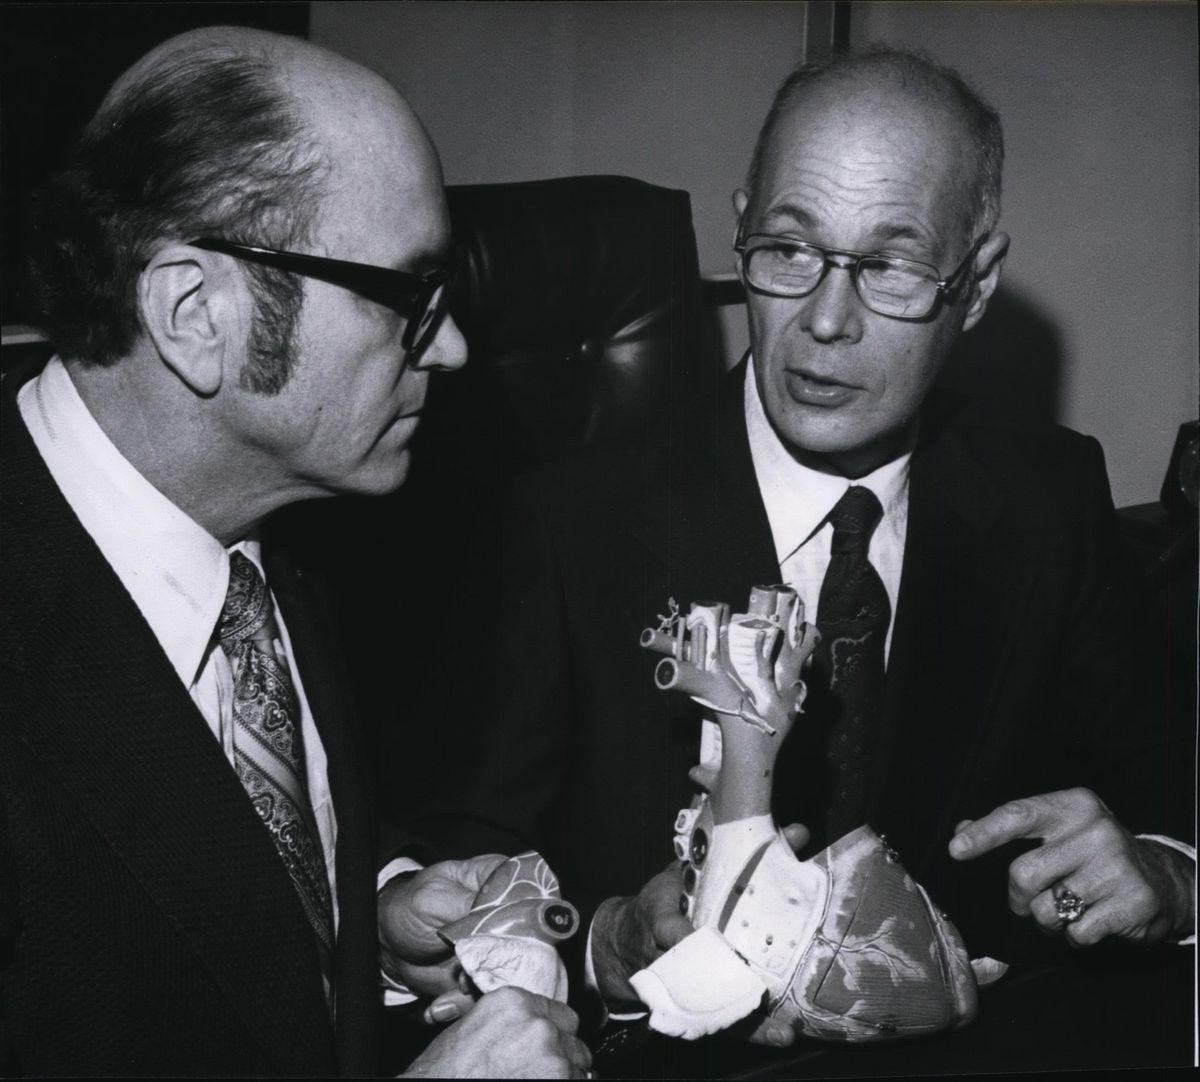 Spokane heart surgeon Dr. Ralph Berg Jr. (right) explains surgical procedures to Neighbors of Woodcraft state director Don E. Belangie in this photo dated 1976.